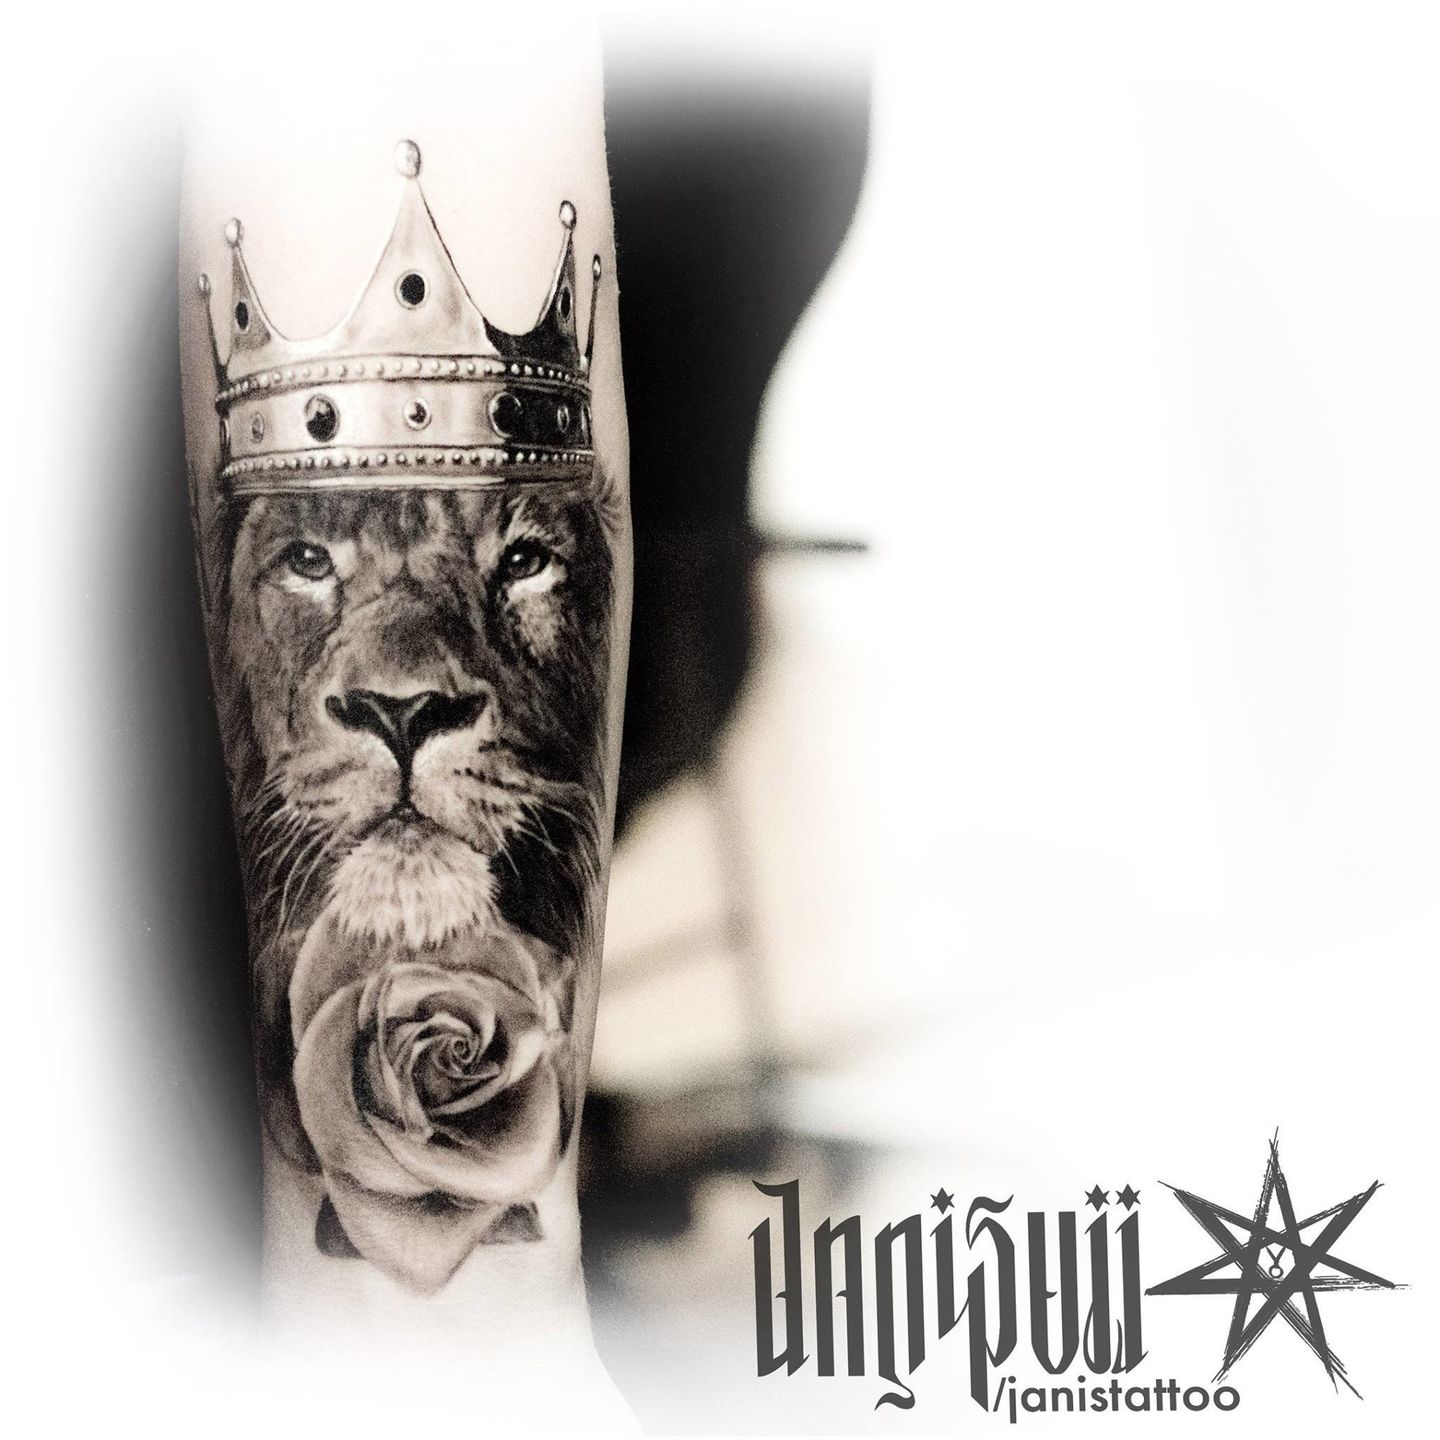 Tattoo uploaded by B-Grey • Lion king tattoo. #lionking #lion #liontattoo  #oslo #norway | Lion tattoo with crown, Lion head tattoos, King tattoos